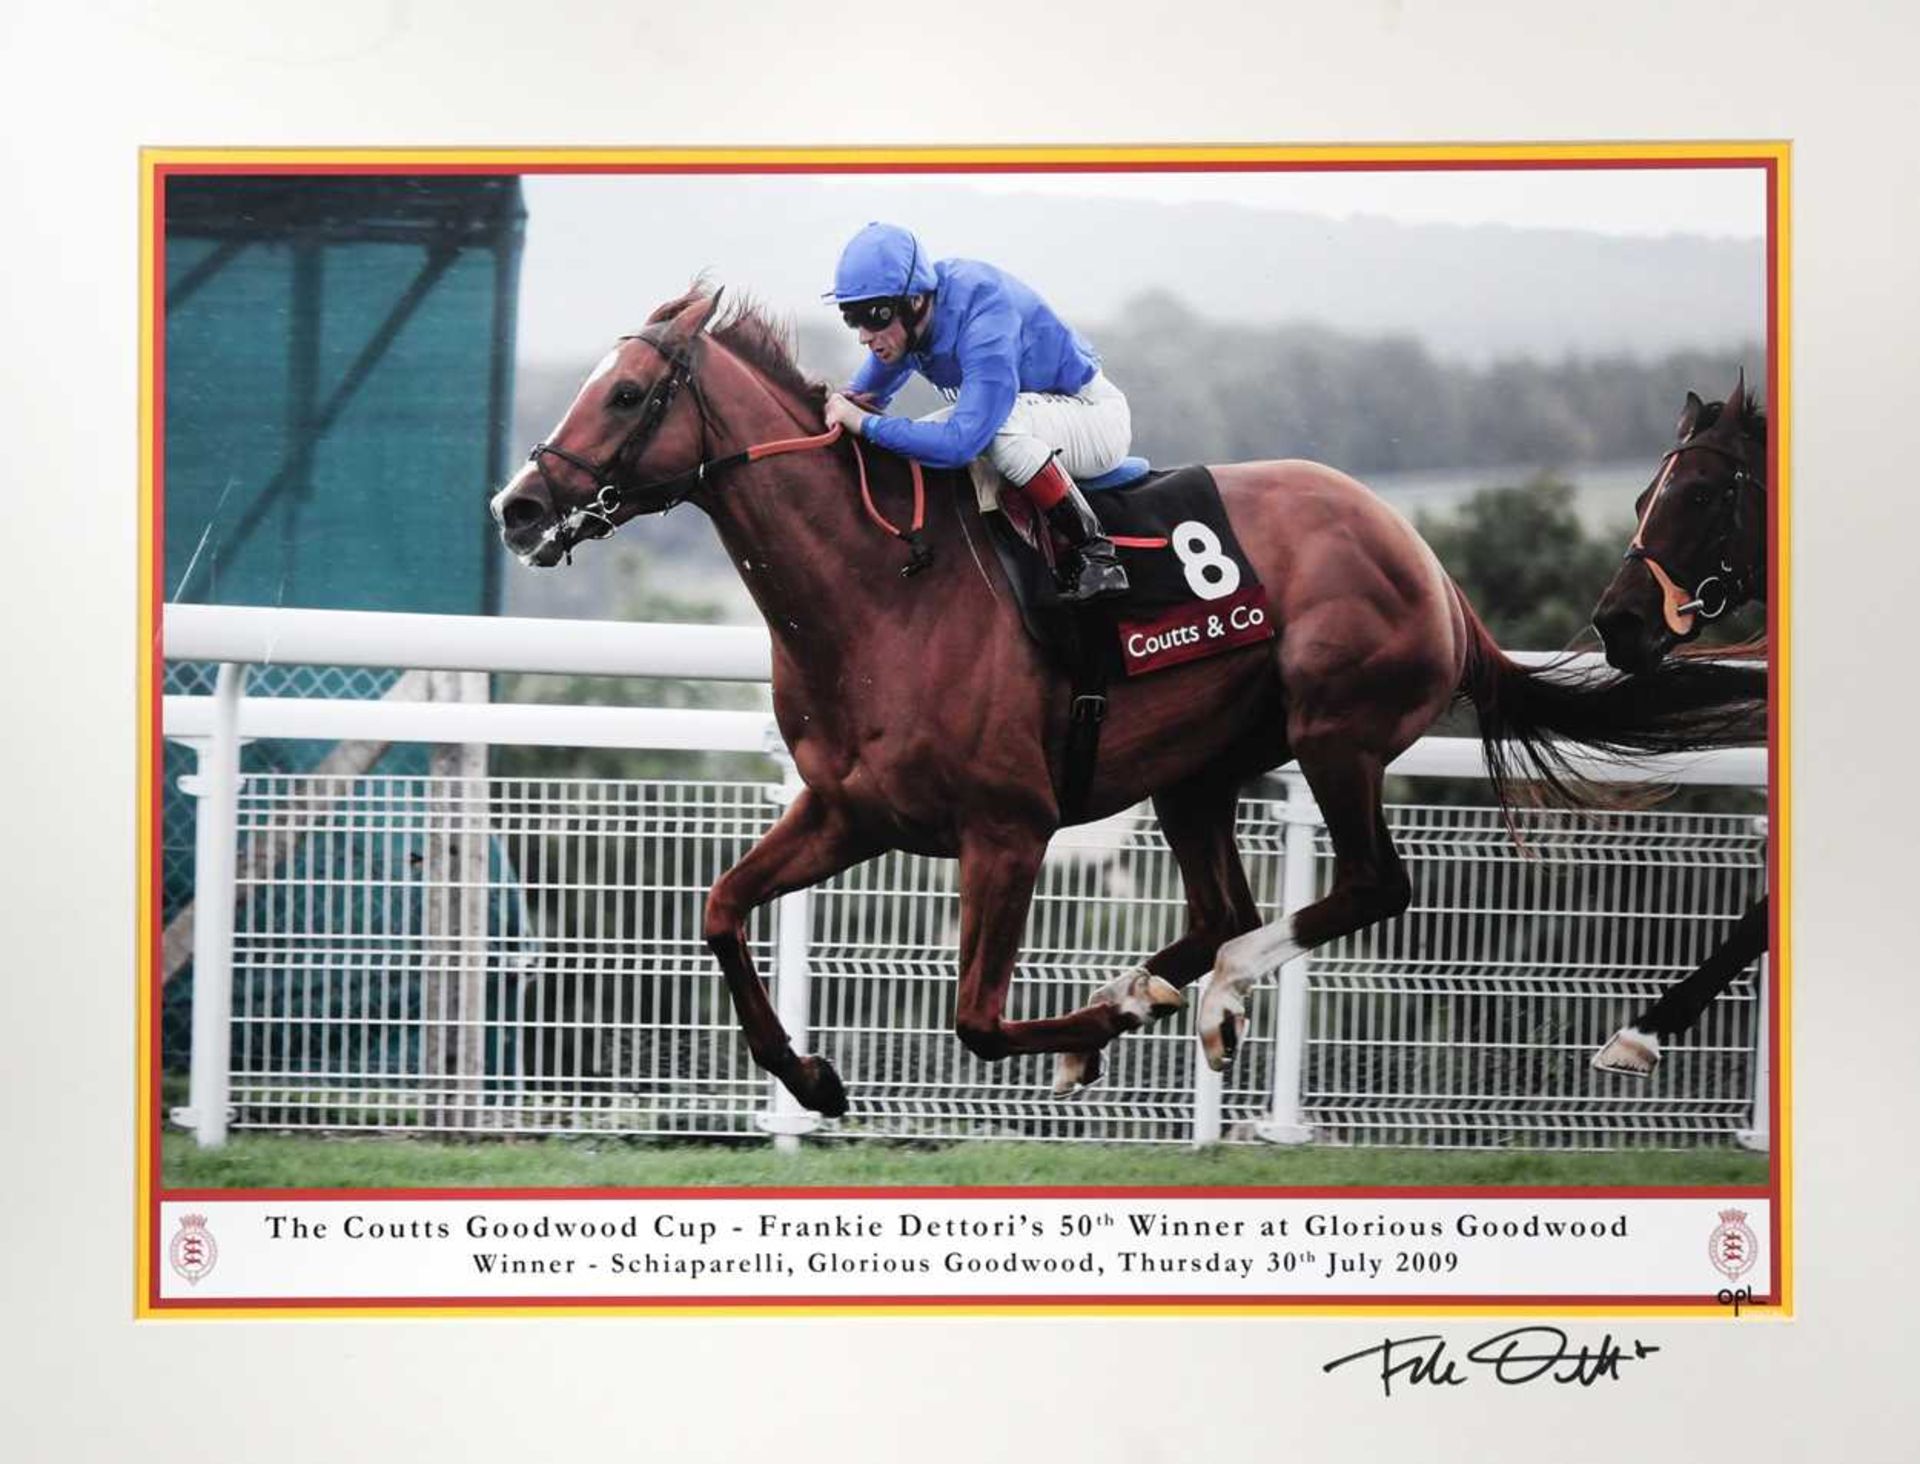 A Coutts Goodwood Cup signed photograph of Frankie Dettori riding Schiaparelli,